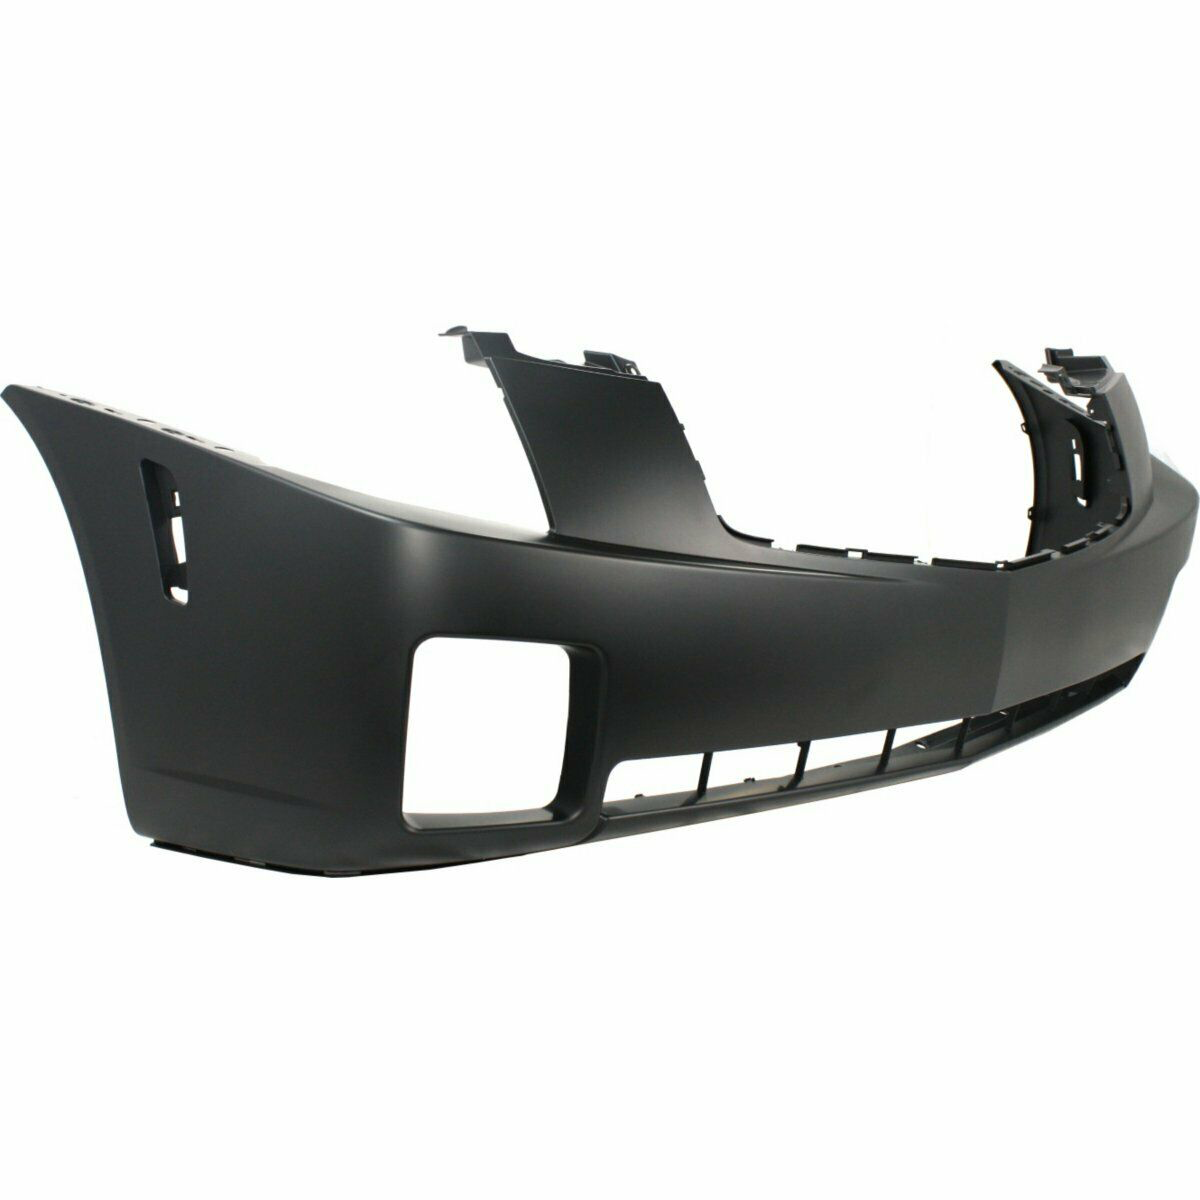 2003-2007 Cadillac CTS Front Bumper Painted to Match